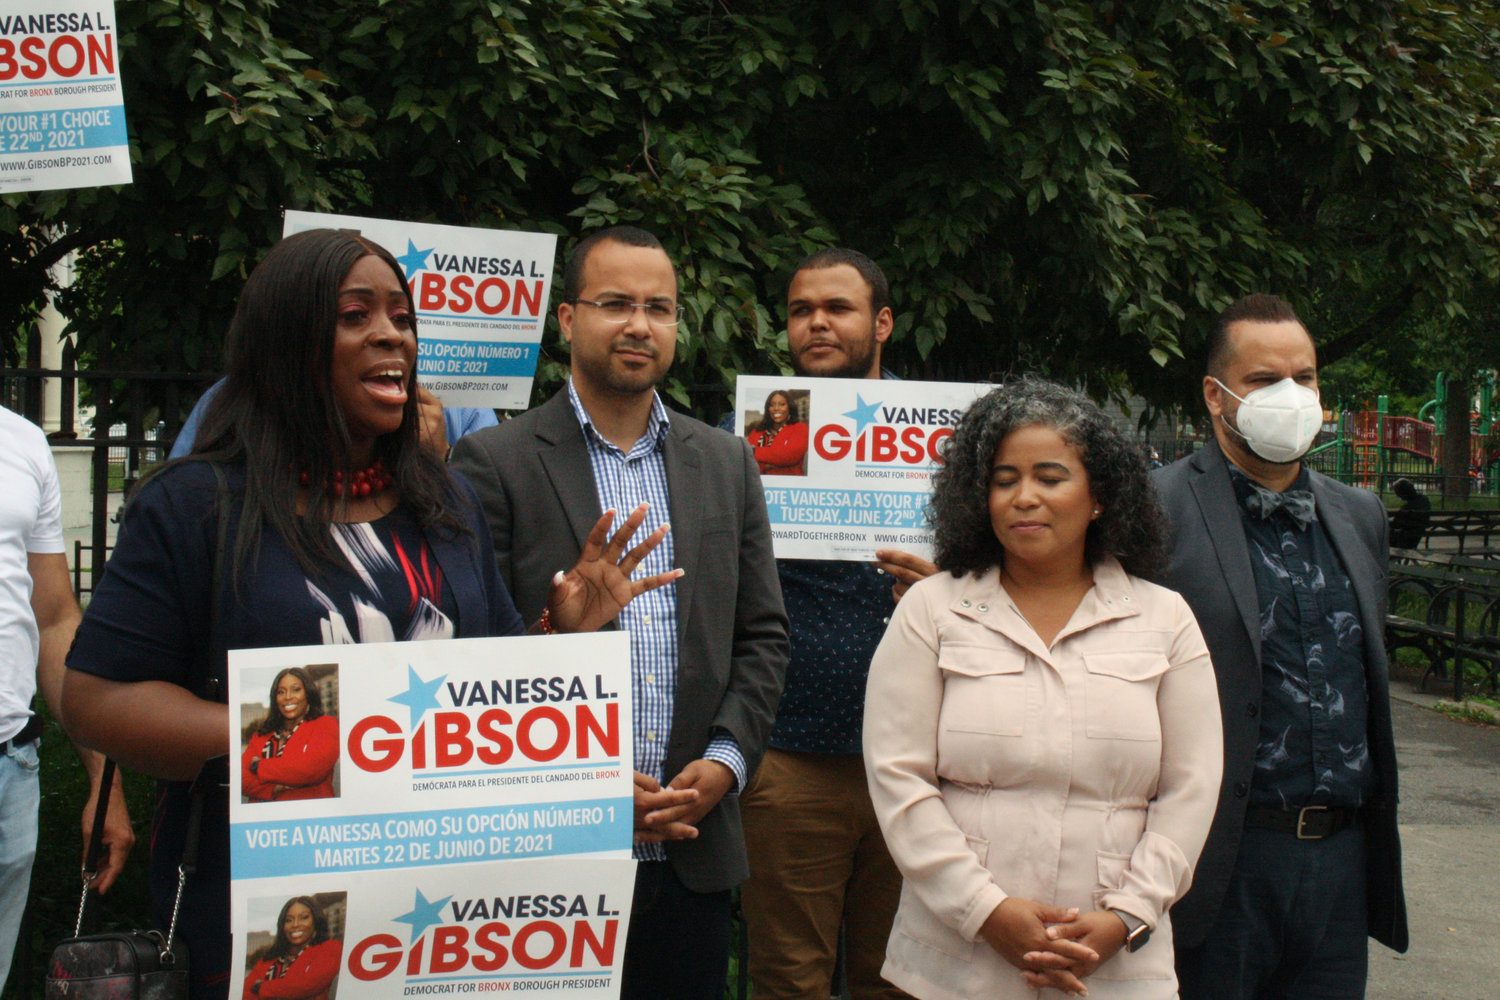 Councilwoman Vanessa Gibson sees improving public school infrastructure as a top priority if she’s elected Bronx borough president in a June 22 Democratic primary. Gibson is running against four other candidates for the seat now held by Ruben Diaz Jr.